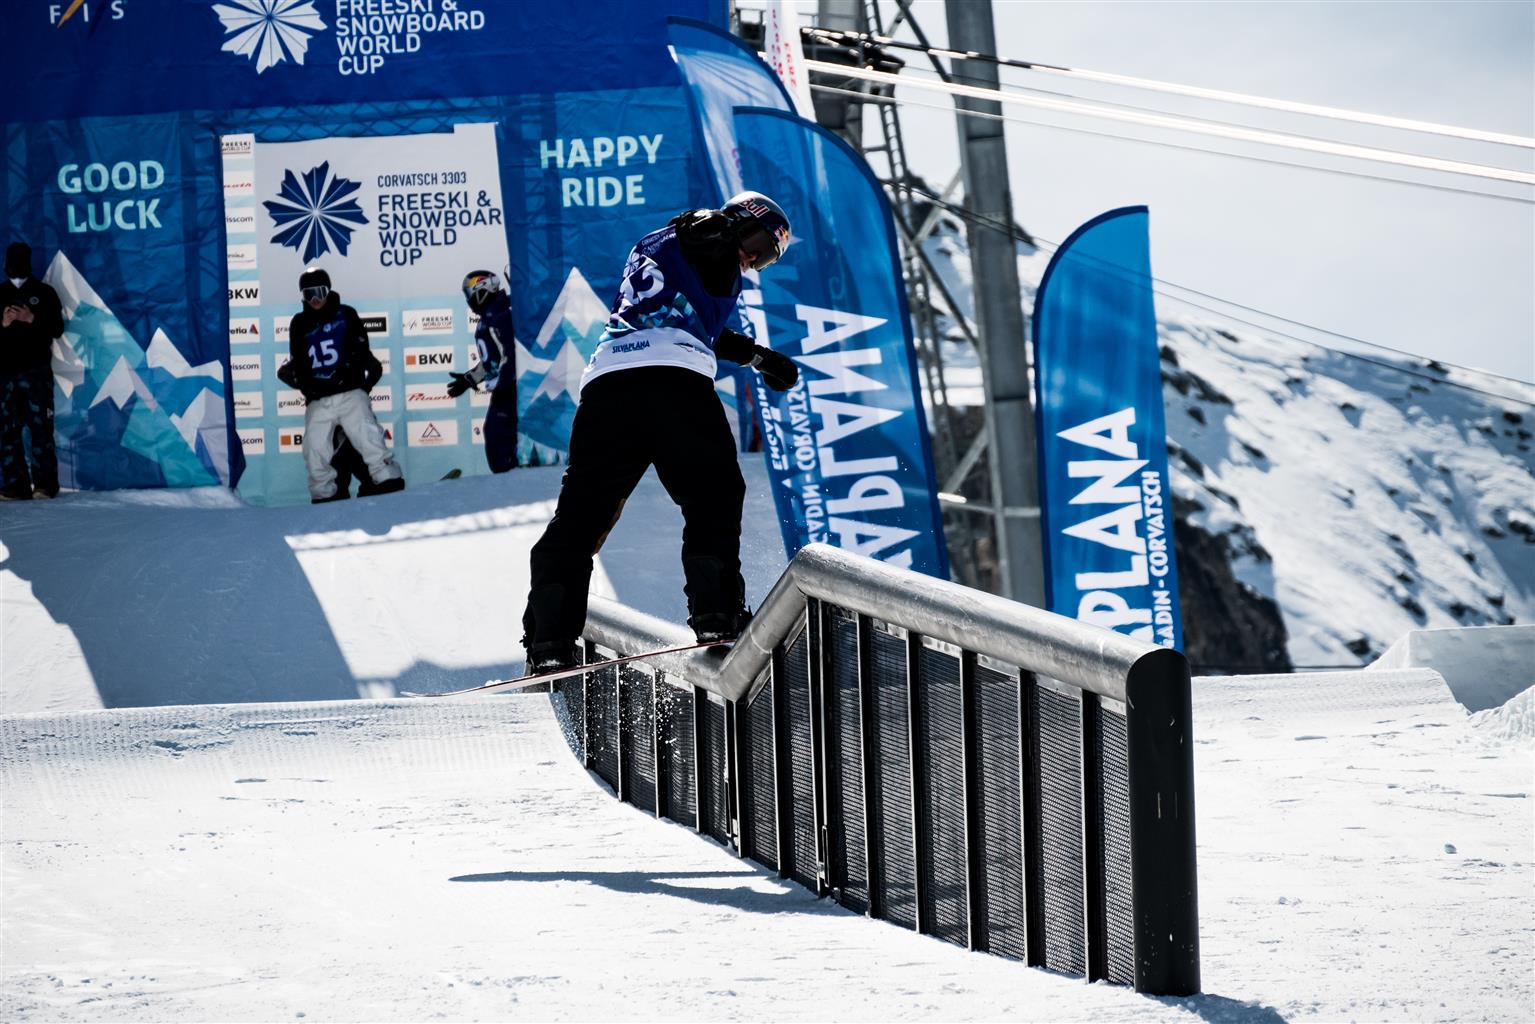 Boardriding | News | Freeski & World Corvatsch 2022 Is Scheduled for March 25 - 27